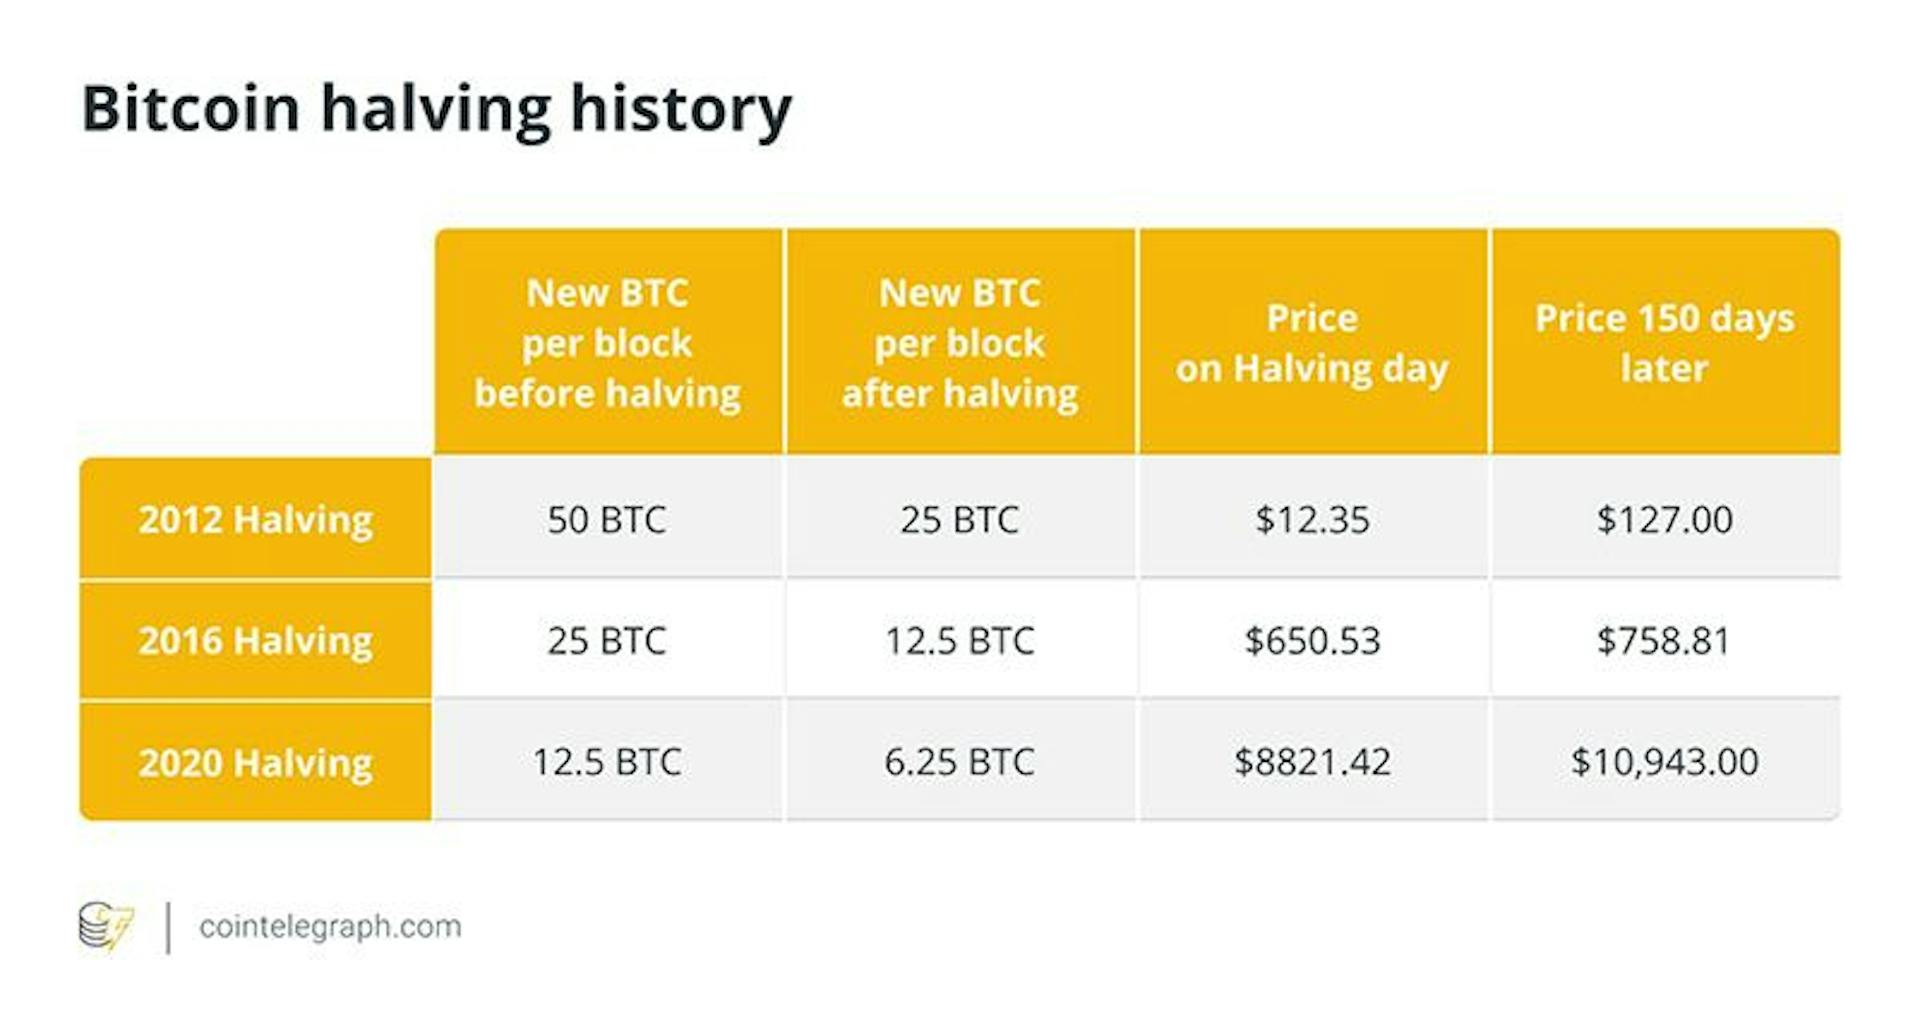 Bitcoin’s price remained considerably higher than pre-halving levels.